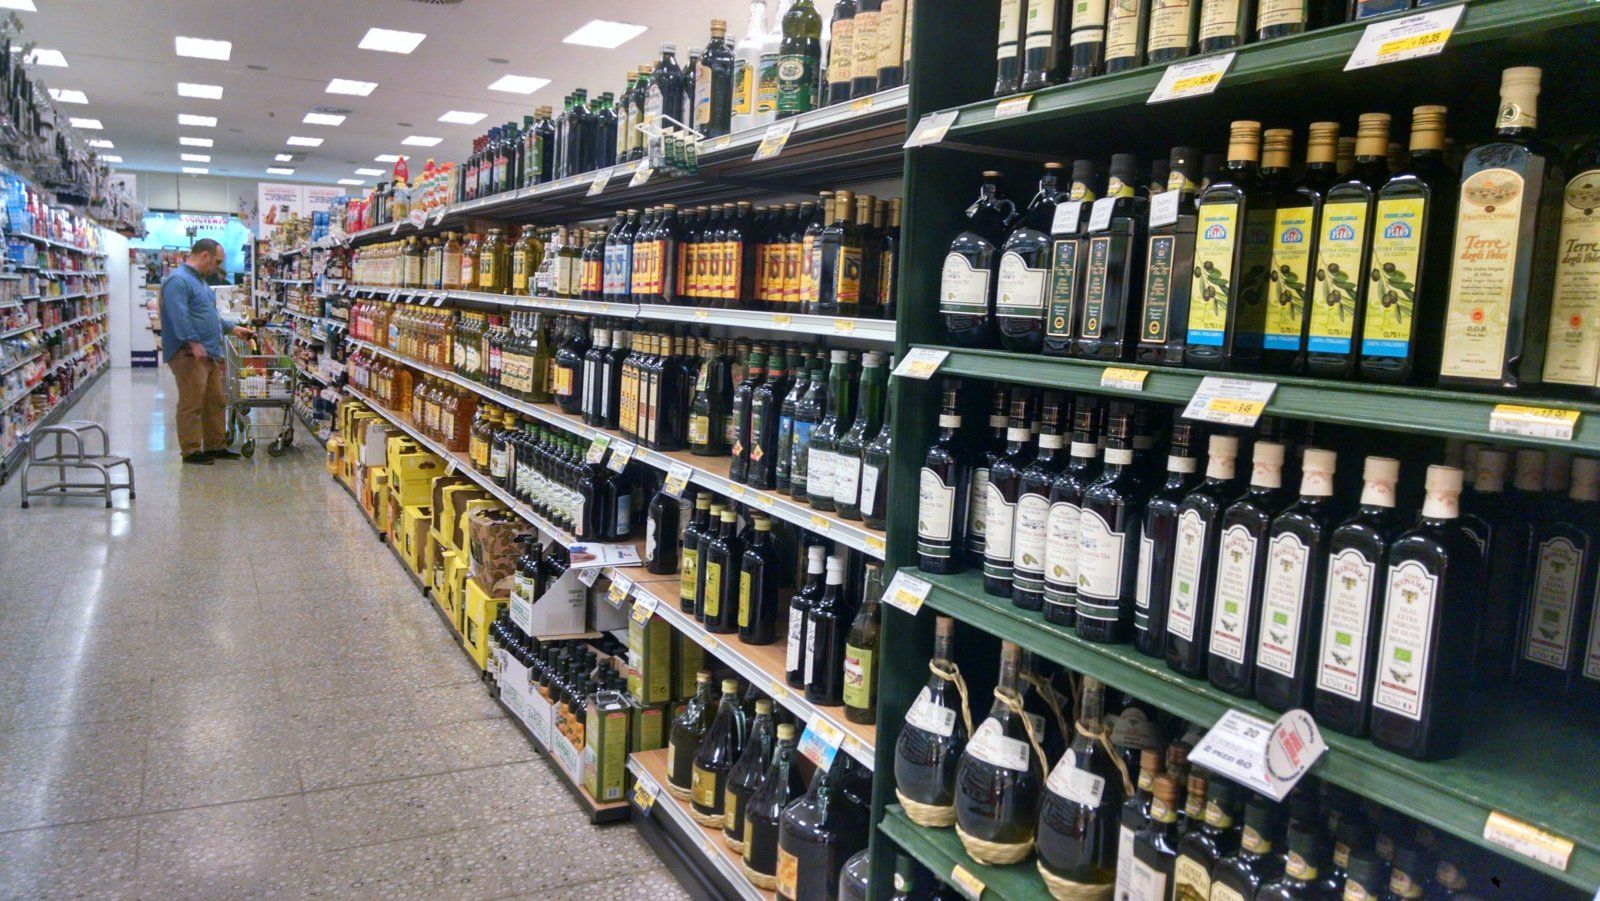 The Olive Oil section.